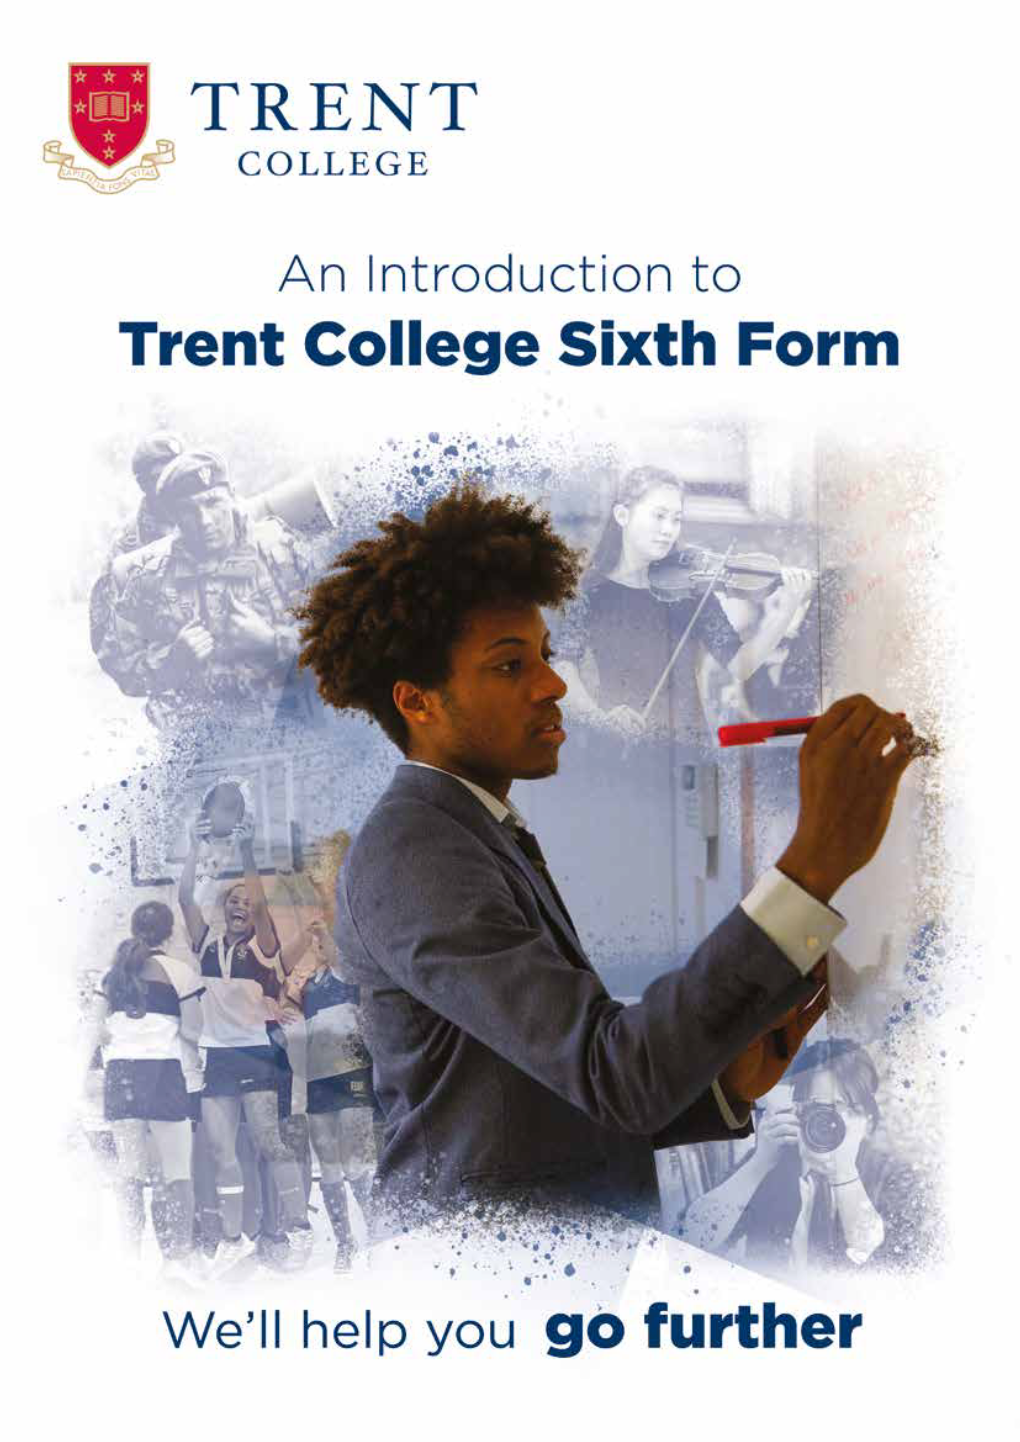 Introduction to Sixth Form